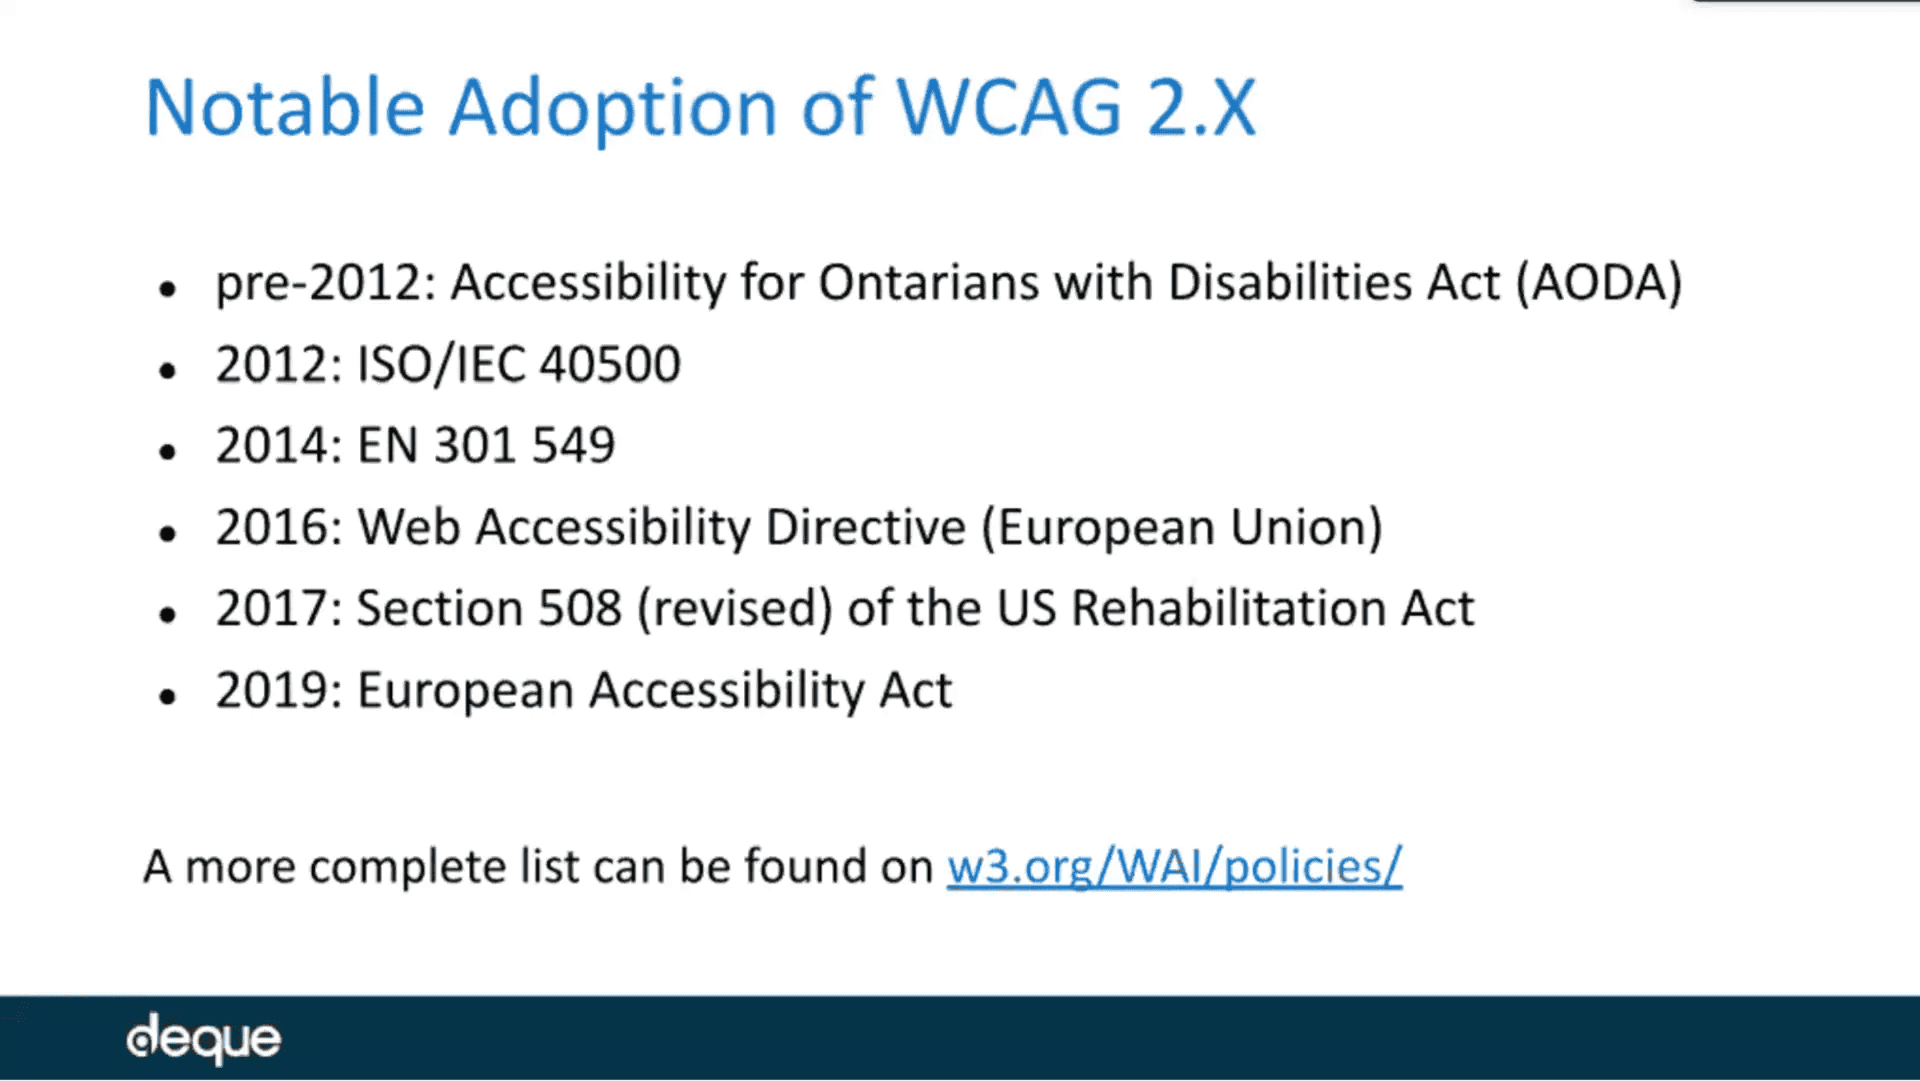 Notable adoptions of WCAG 2.X